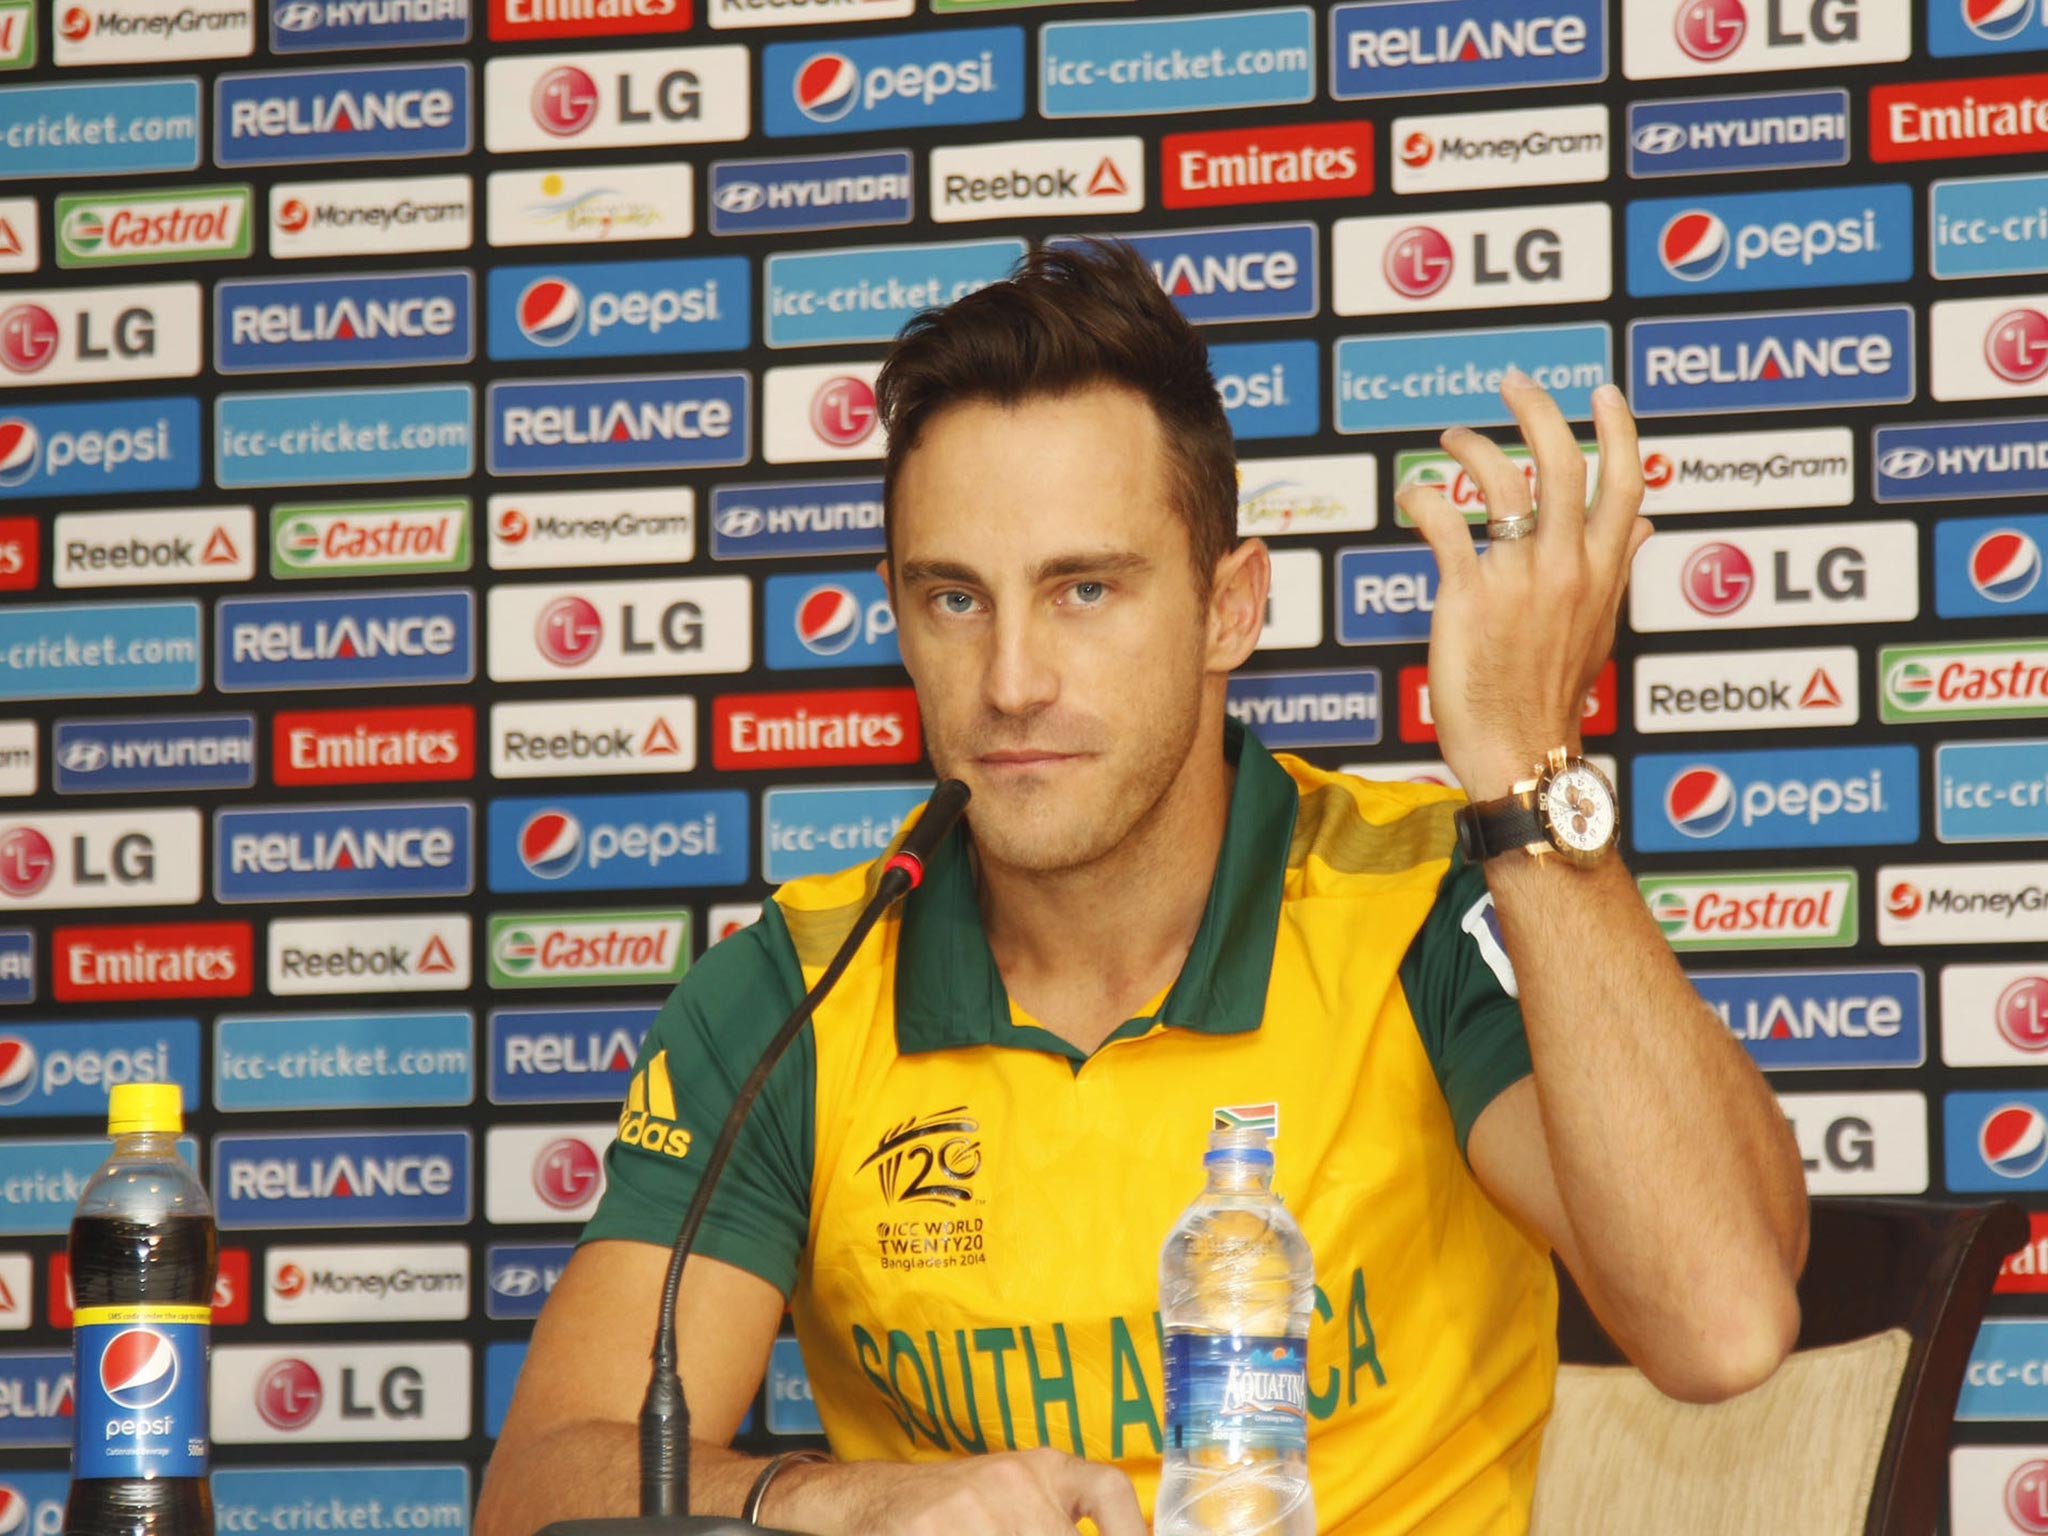 South Africa’s captain Faf du Plessis has been banned due to his team’s slow over rate